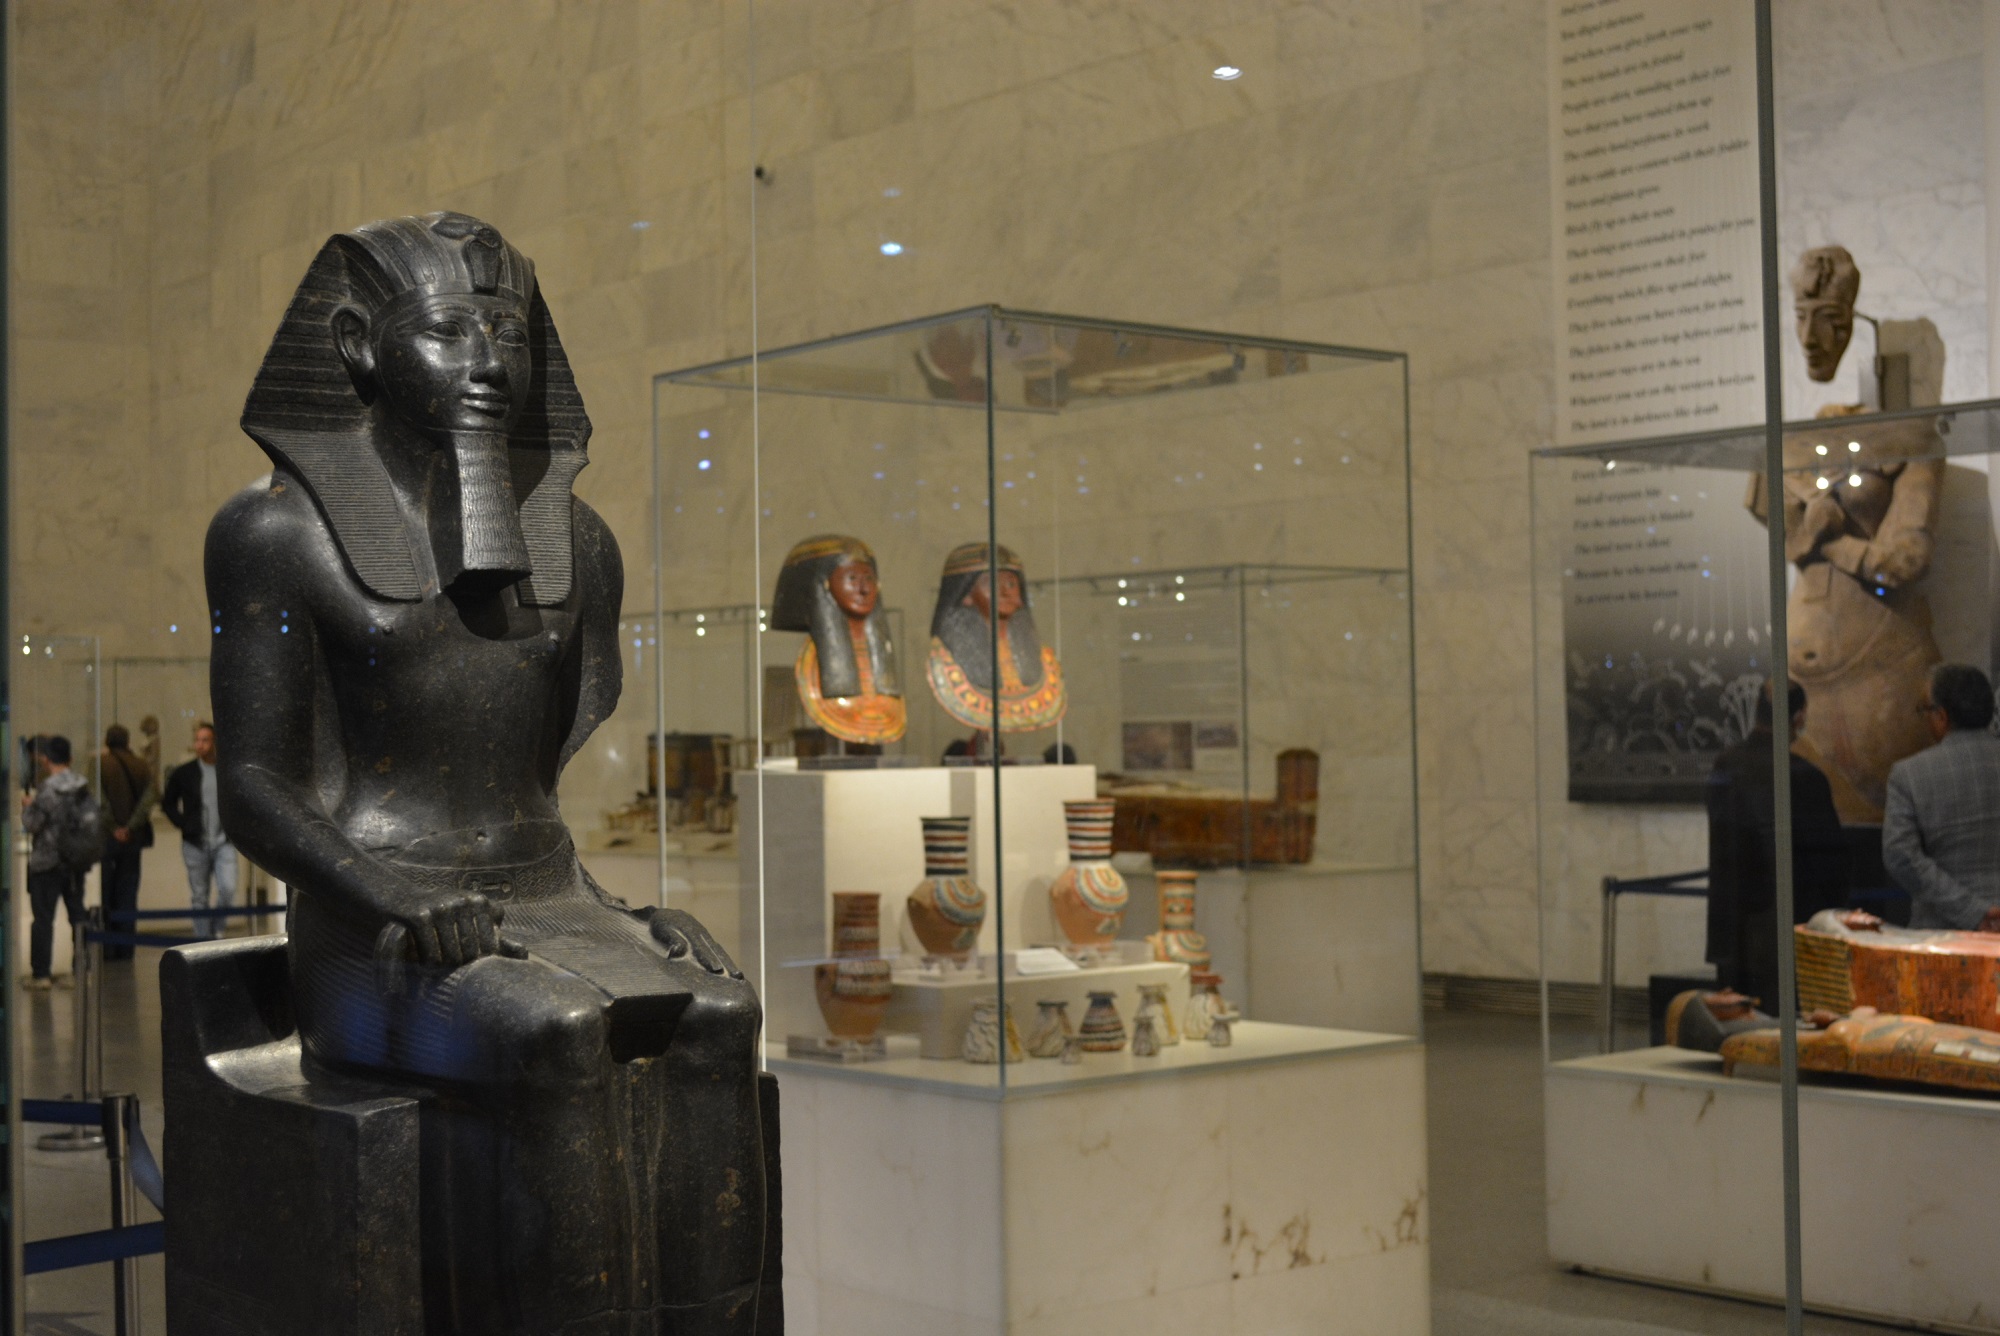 Displayed items in the National Museum of Egyptian Civilization